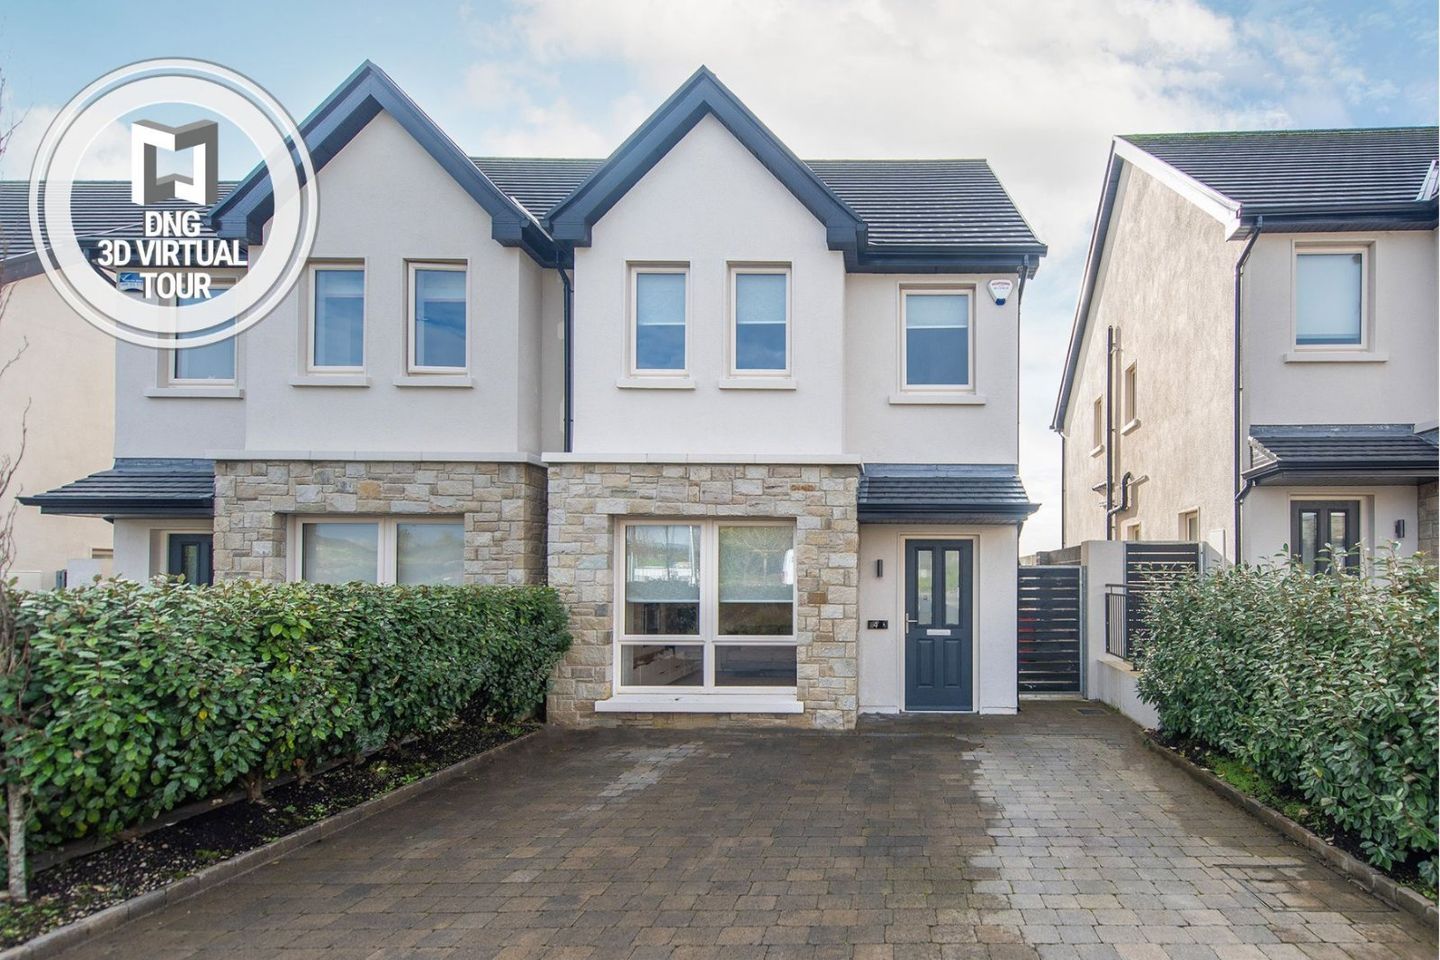 4 Breacan, Letteragh Road, Galway City, Co. Galway